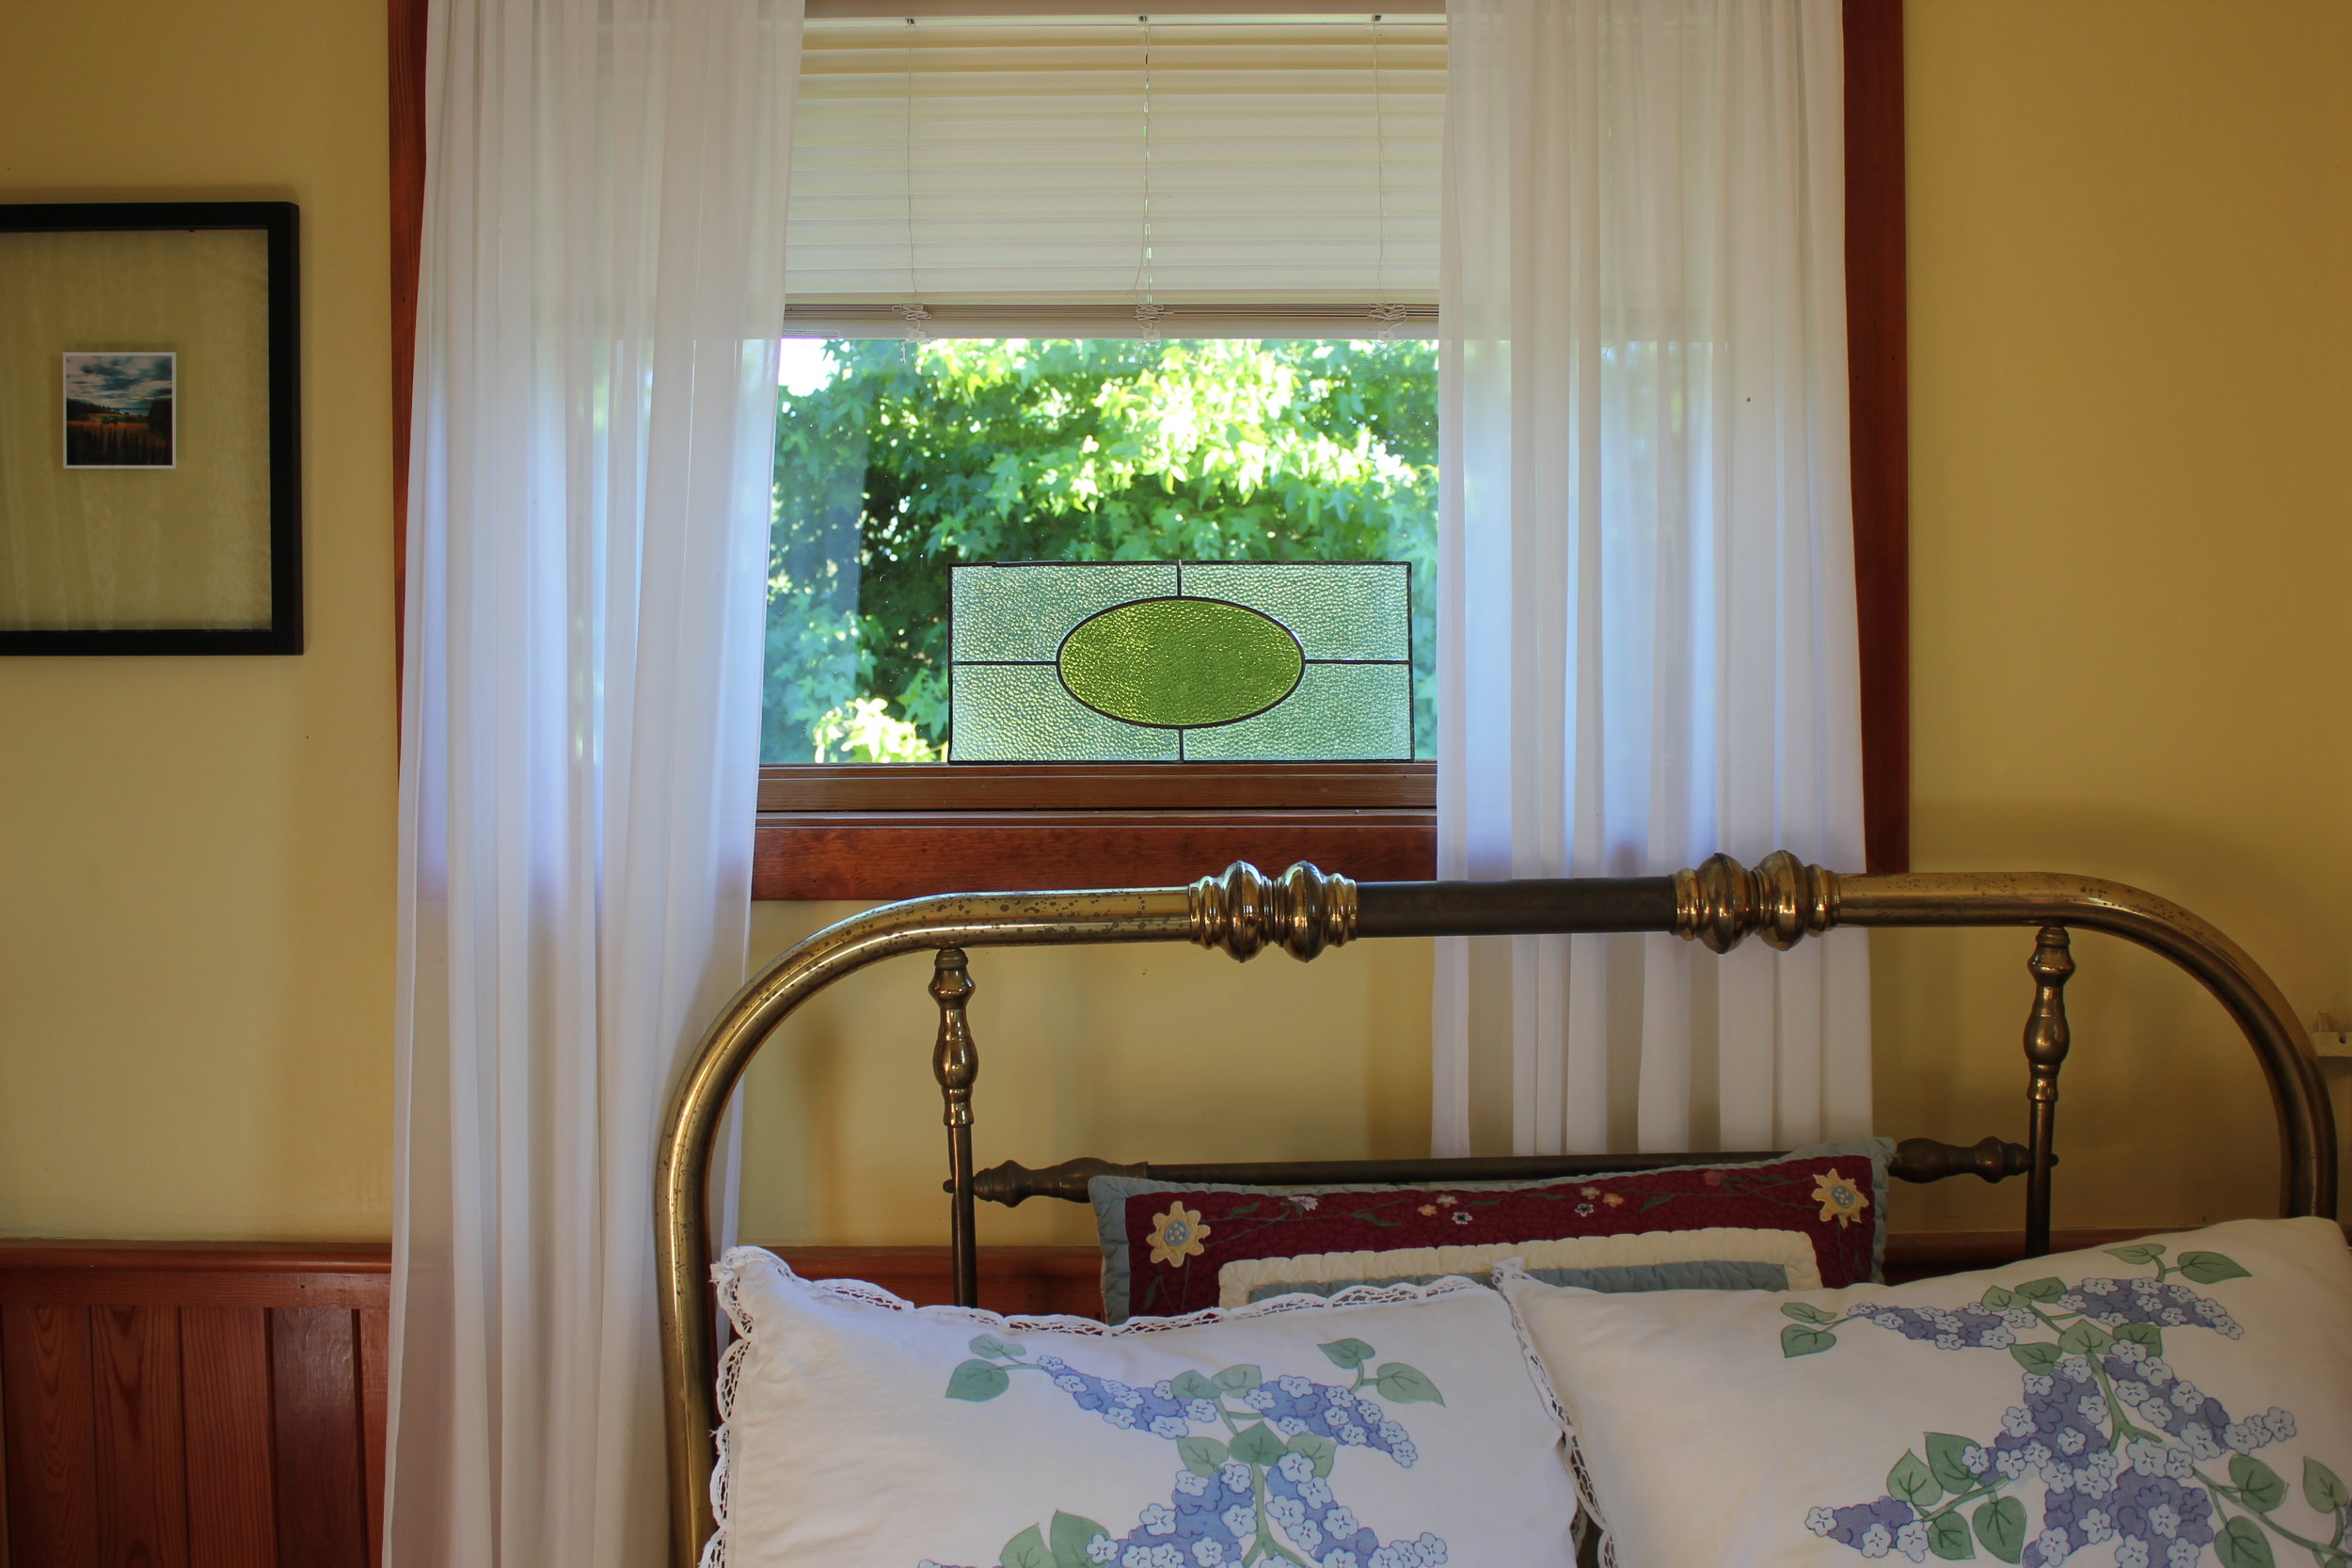 plum nelli iron bed and stain glass window in antique washington farm house.JPG